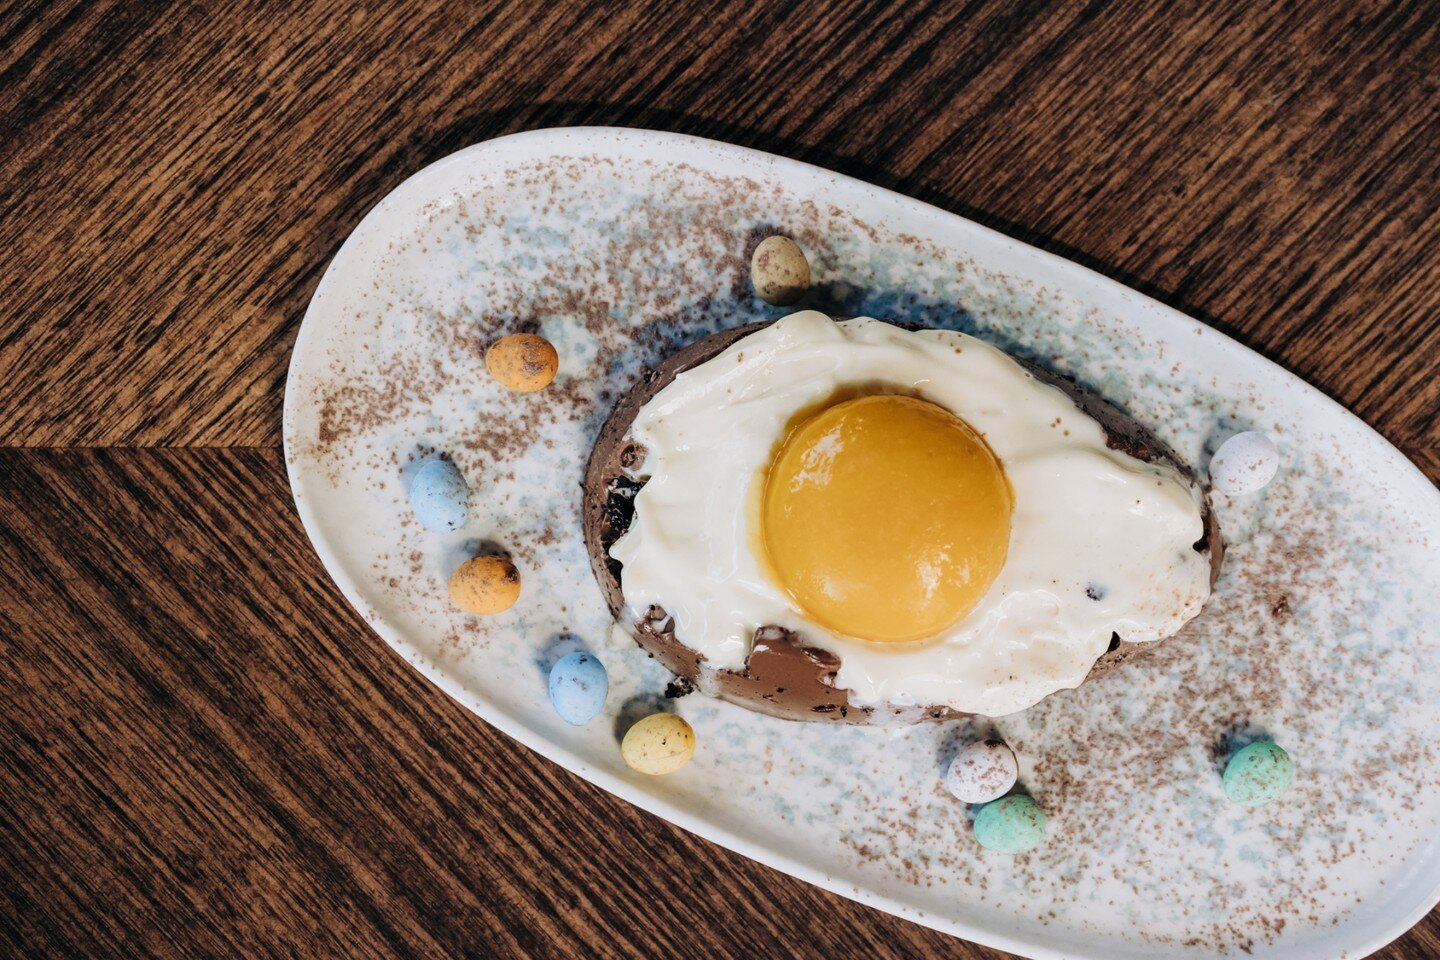 Your Easter just got sweeter! Chef Ryan's 'Chocolate Bonanza' masterpiece awaits - Tag someone you'd share this drool-worthy dessert with.

Available from today until sold out. Don't get chocolate envy - Make a booking to visit!

#HotelGosford #Easte